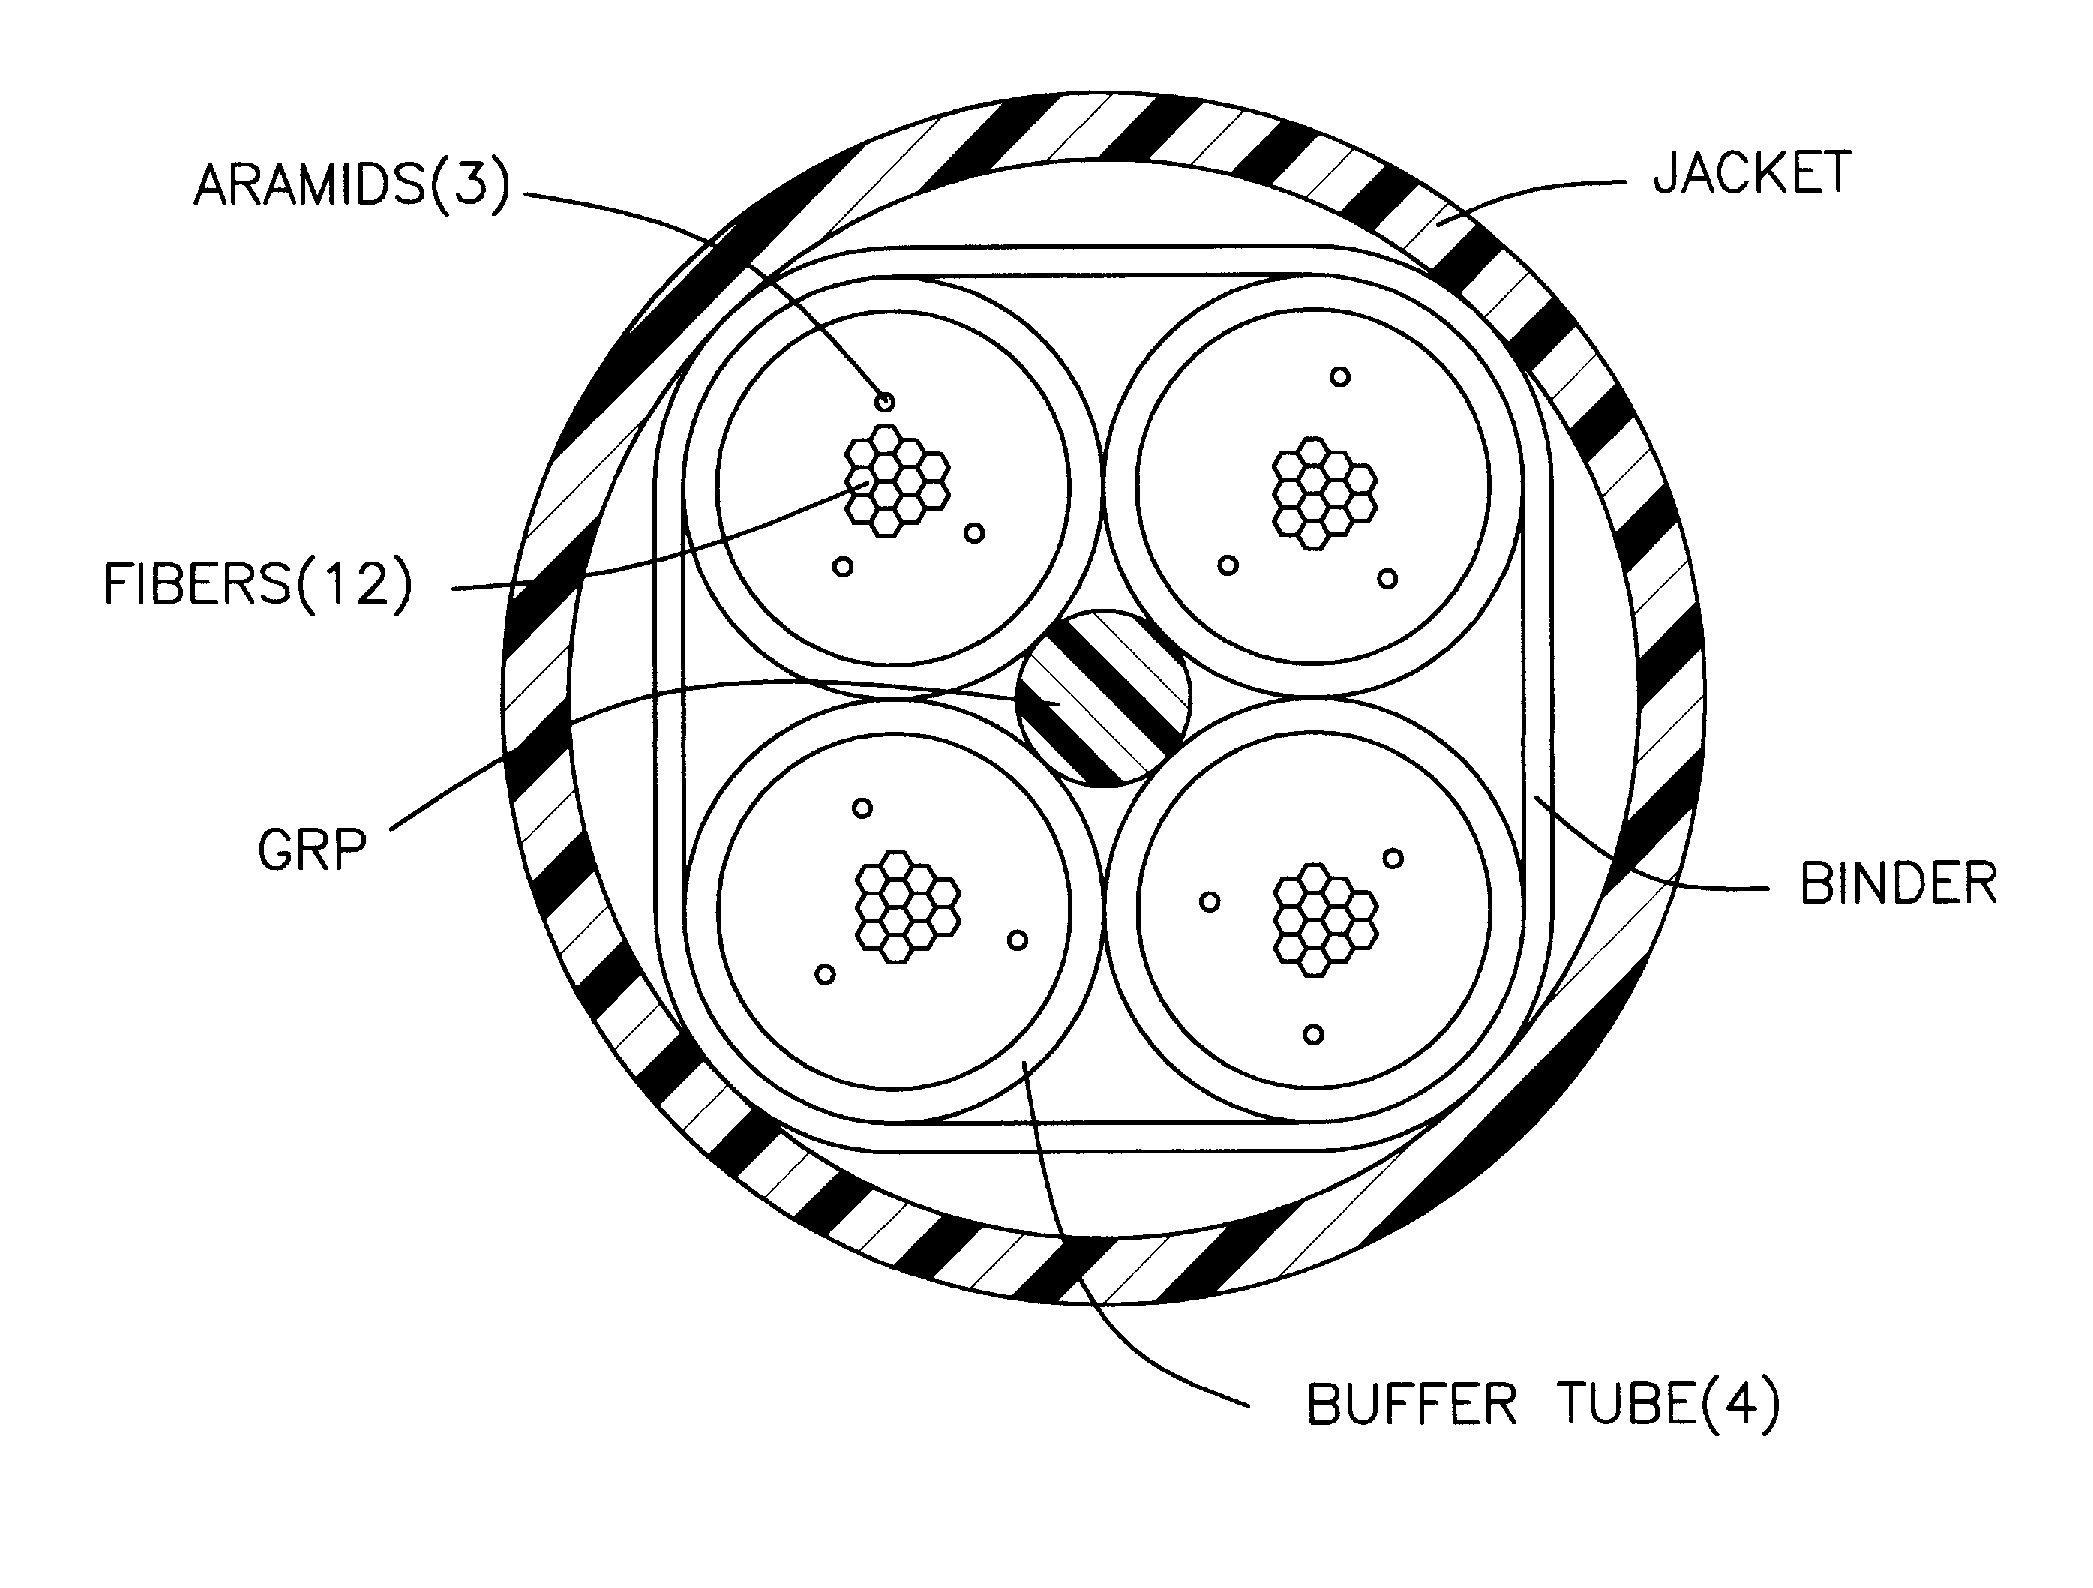 Fiber optic cable with improved low temperature and compression resistance